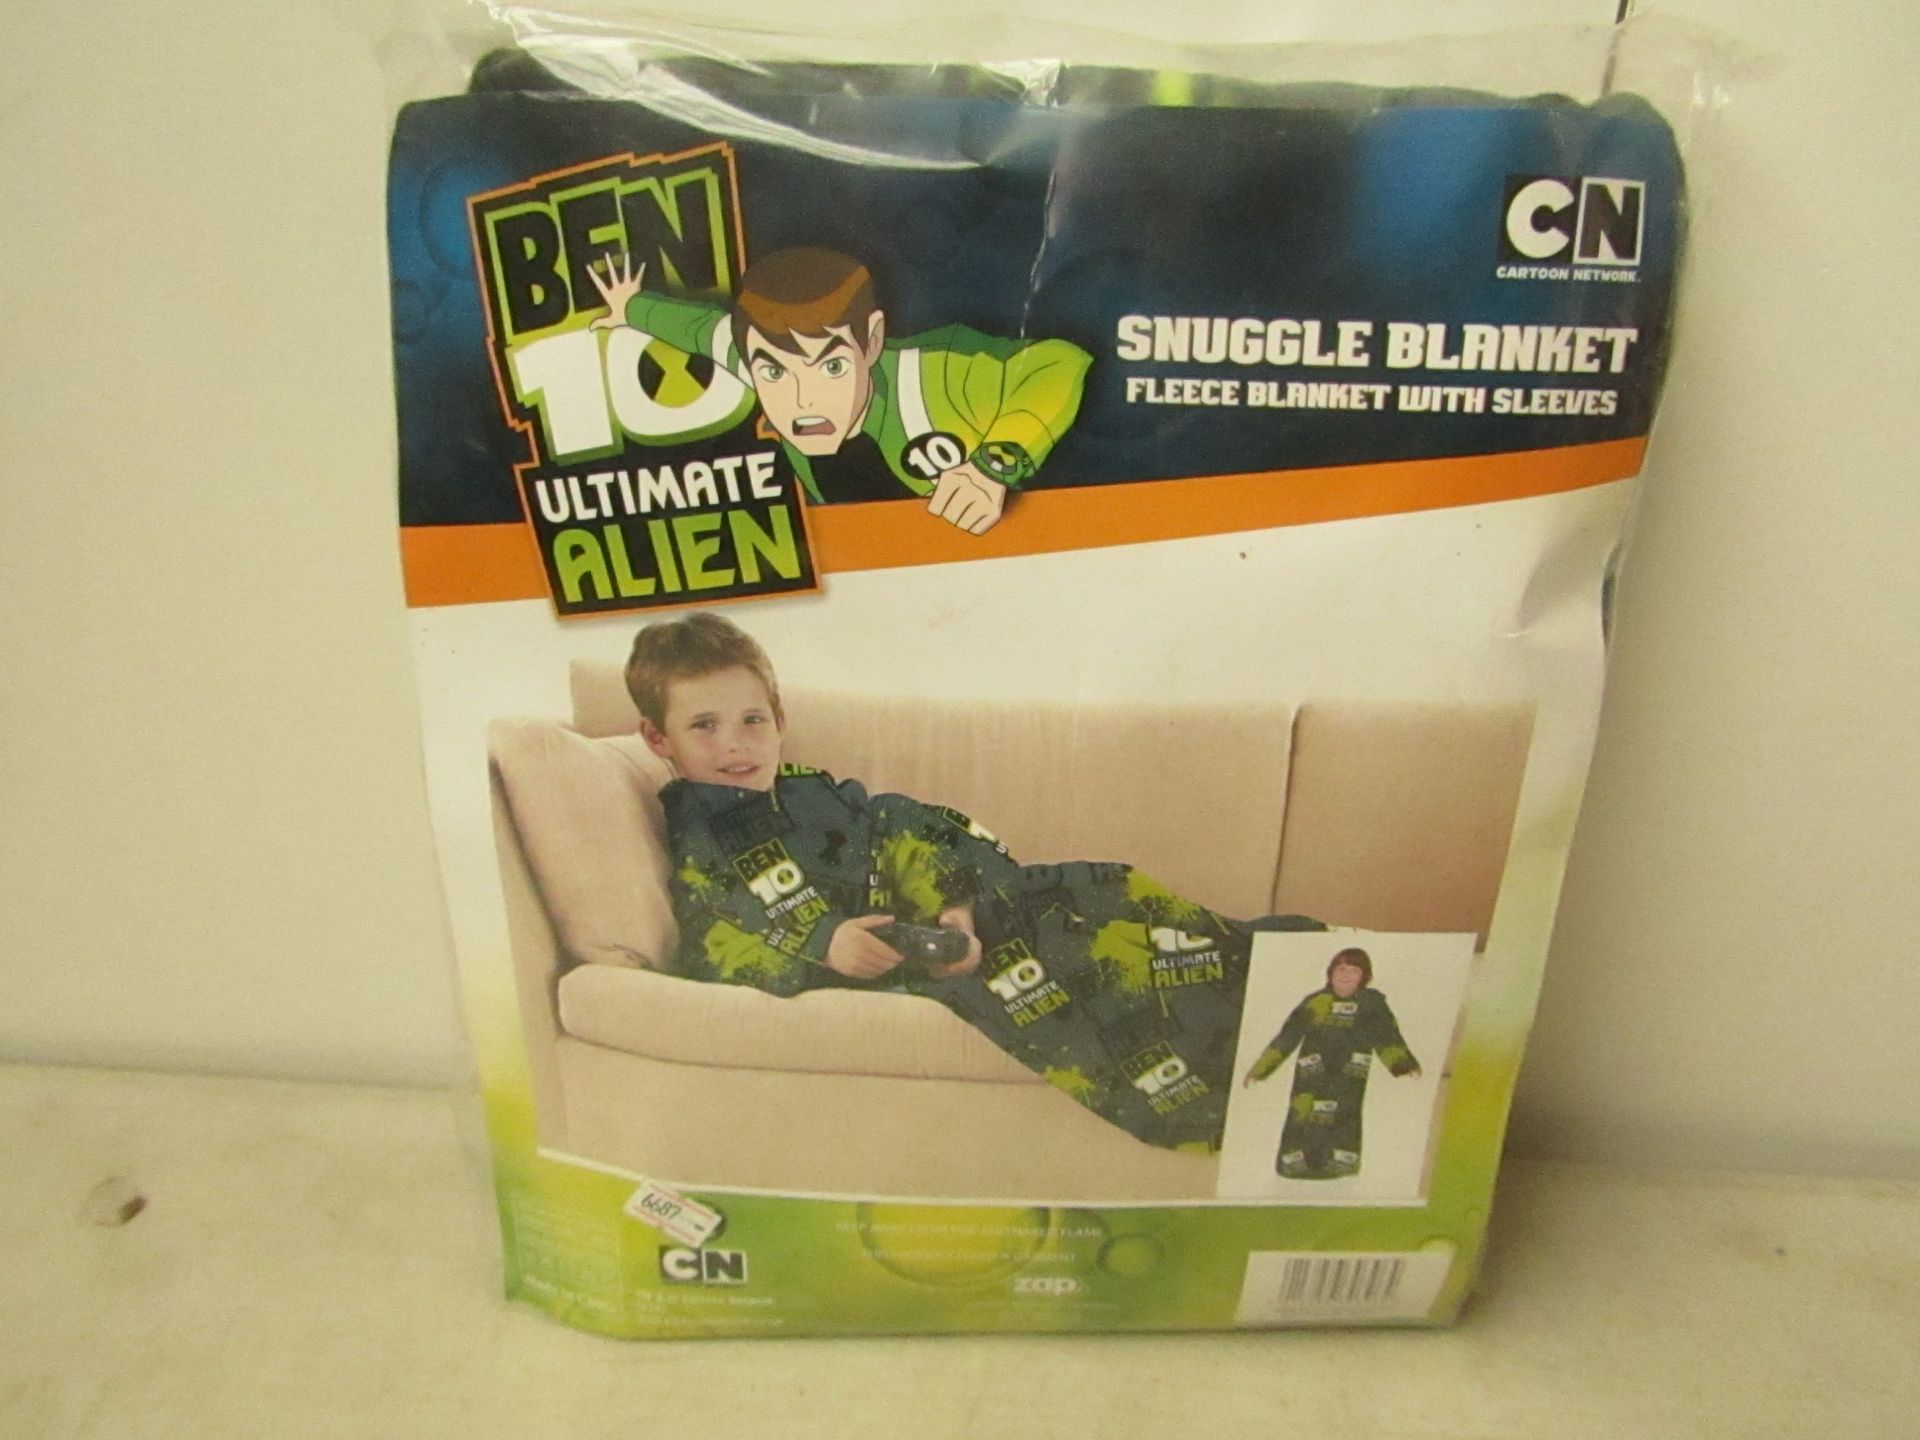 Ben 10 snuggle blanket with sleeves new in packaging